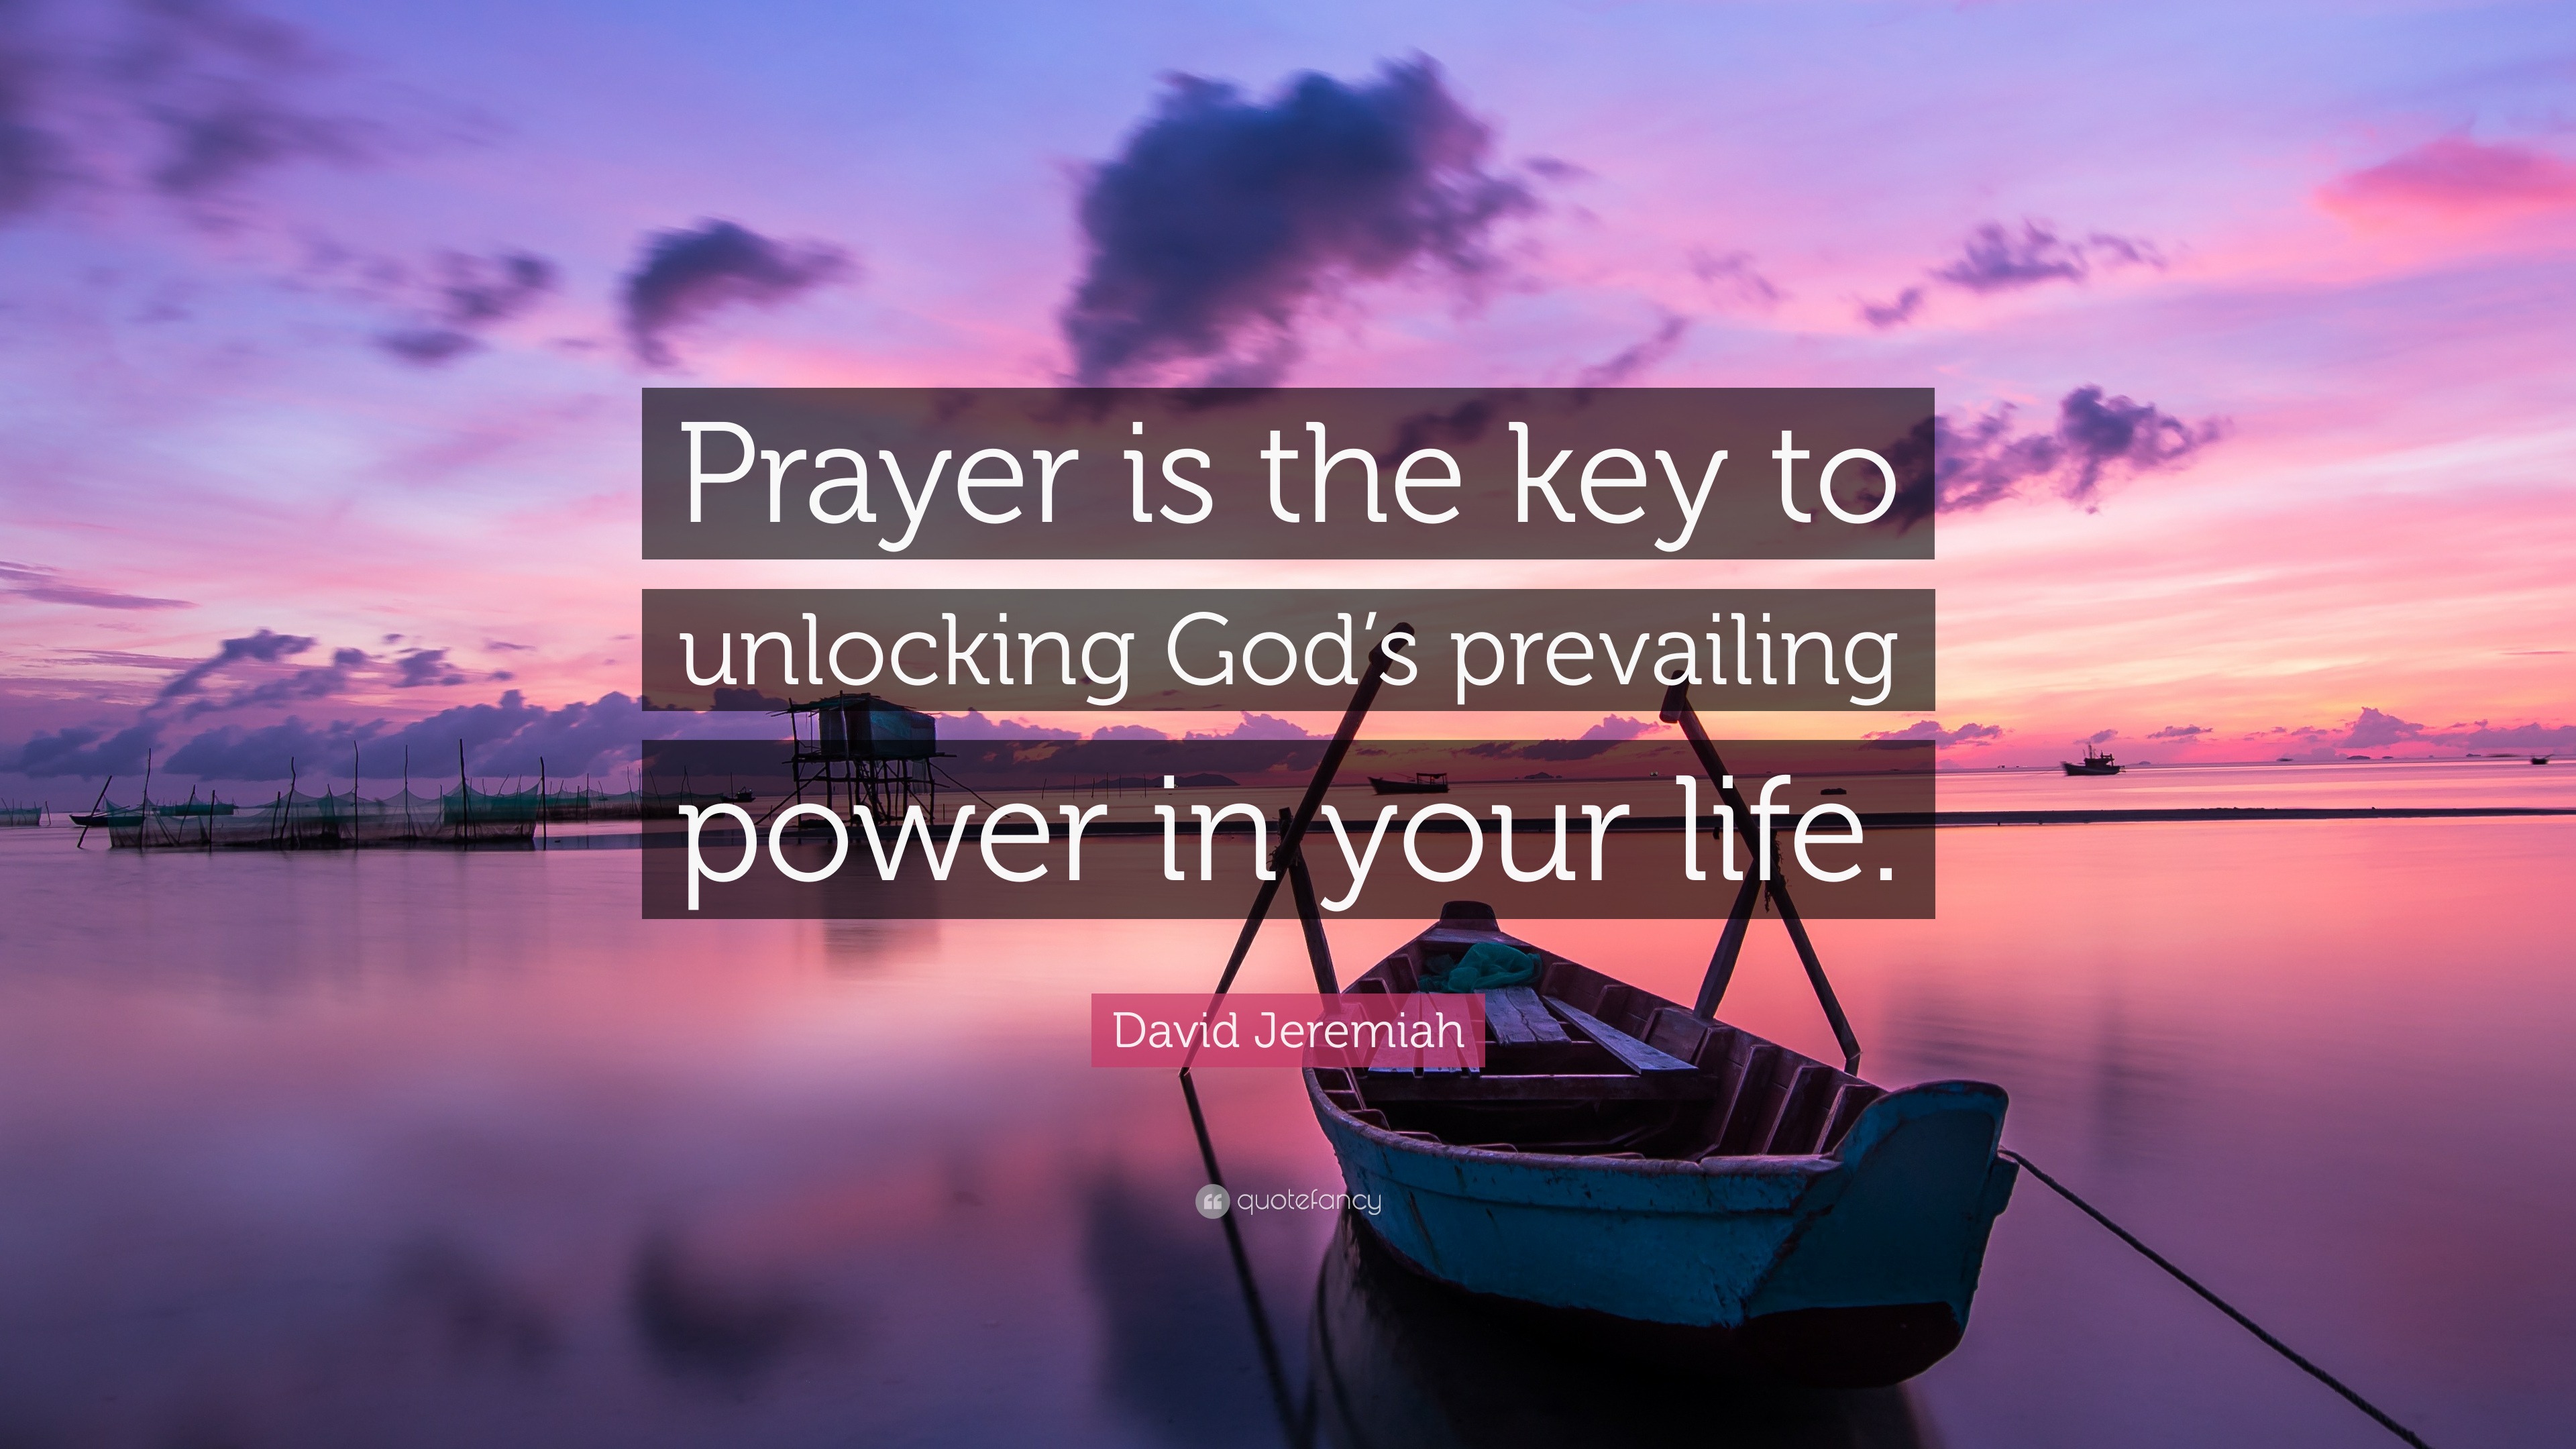 David Jeremiah Quote: “Prayer is the key to unlocking God’s prevailing